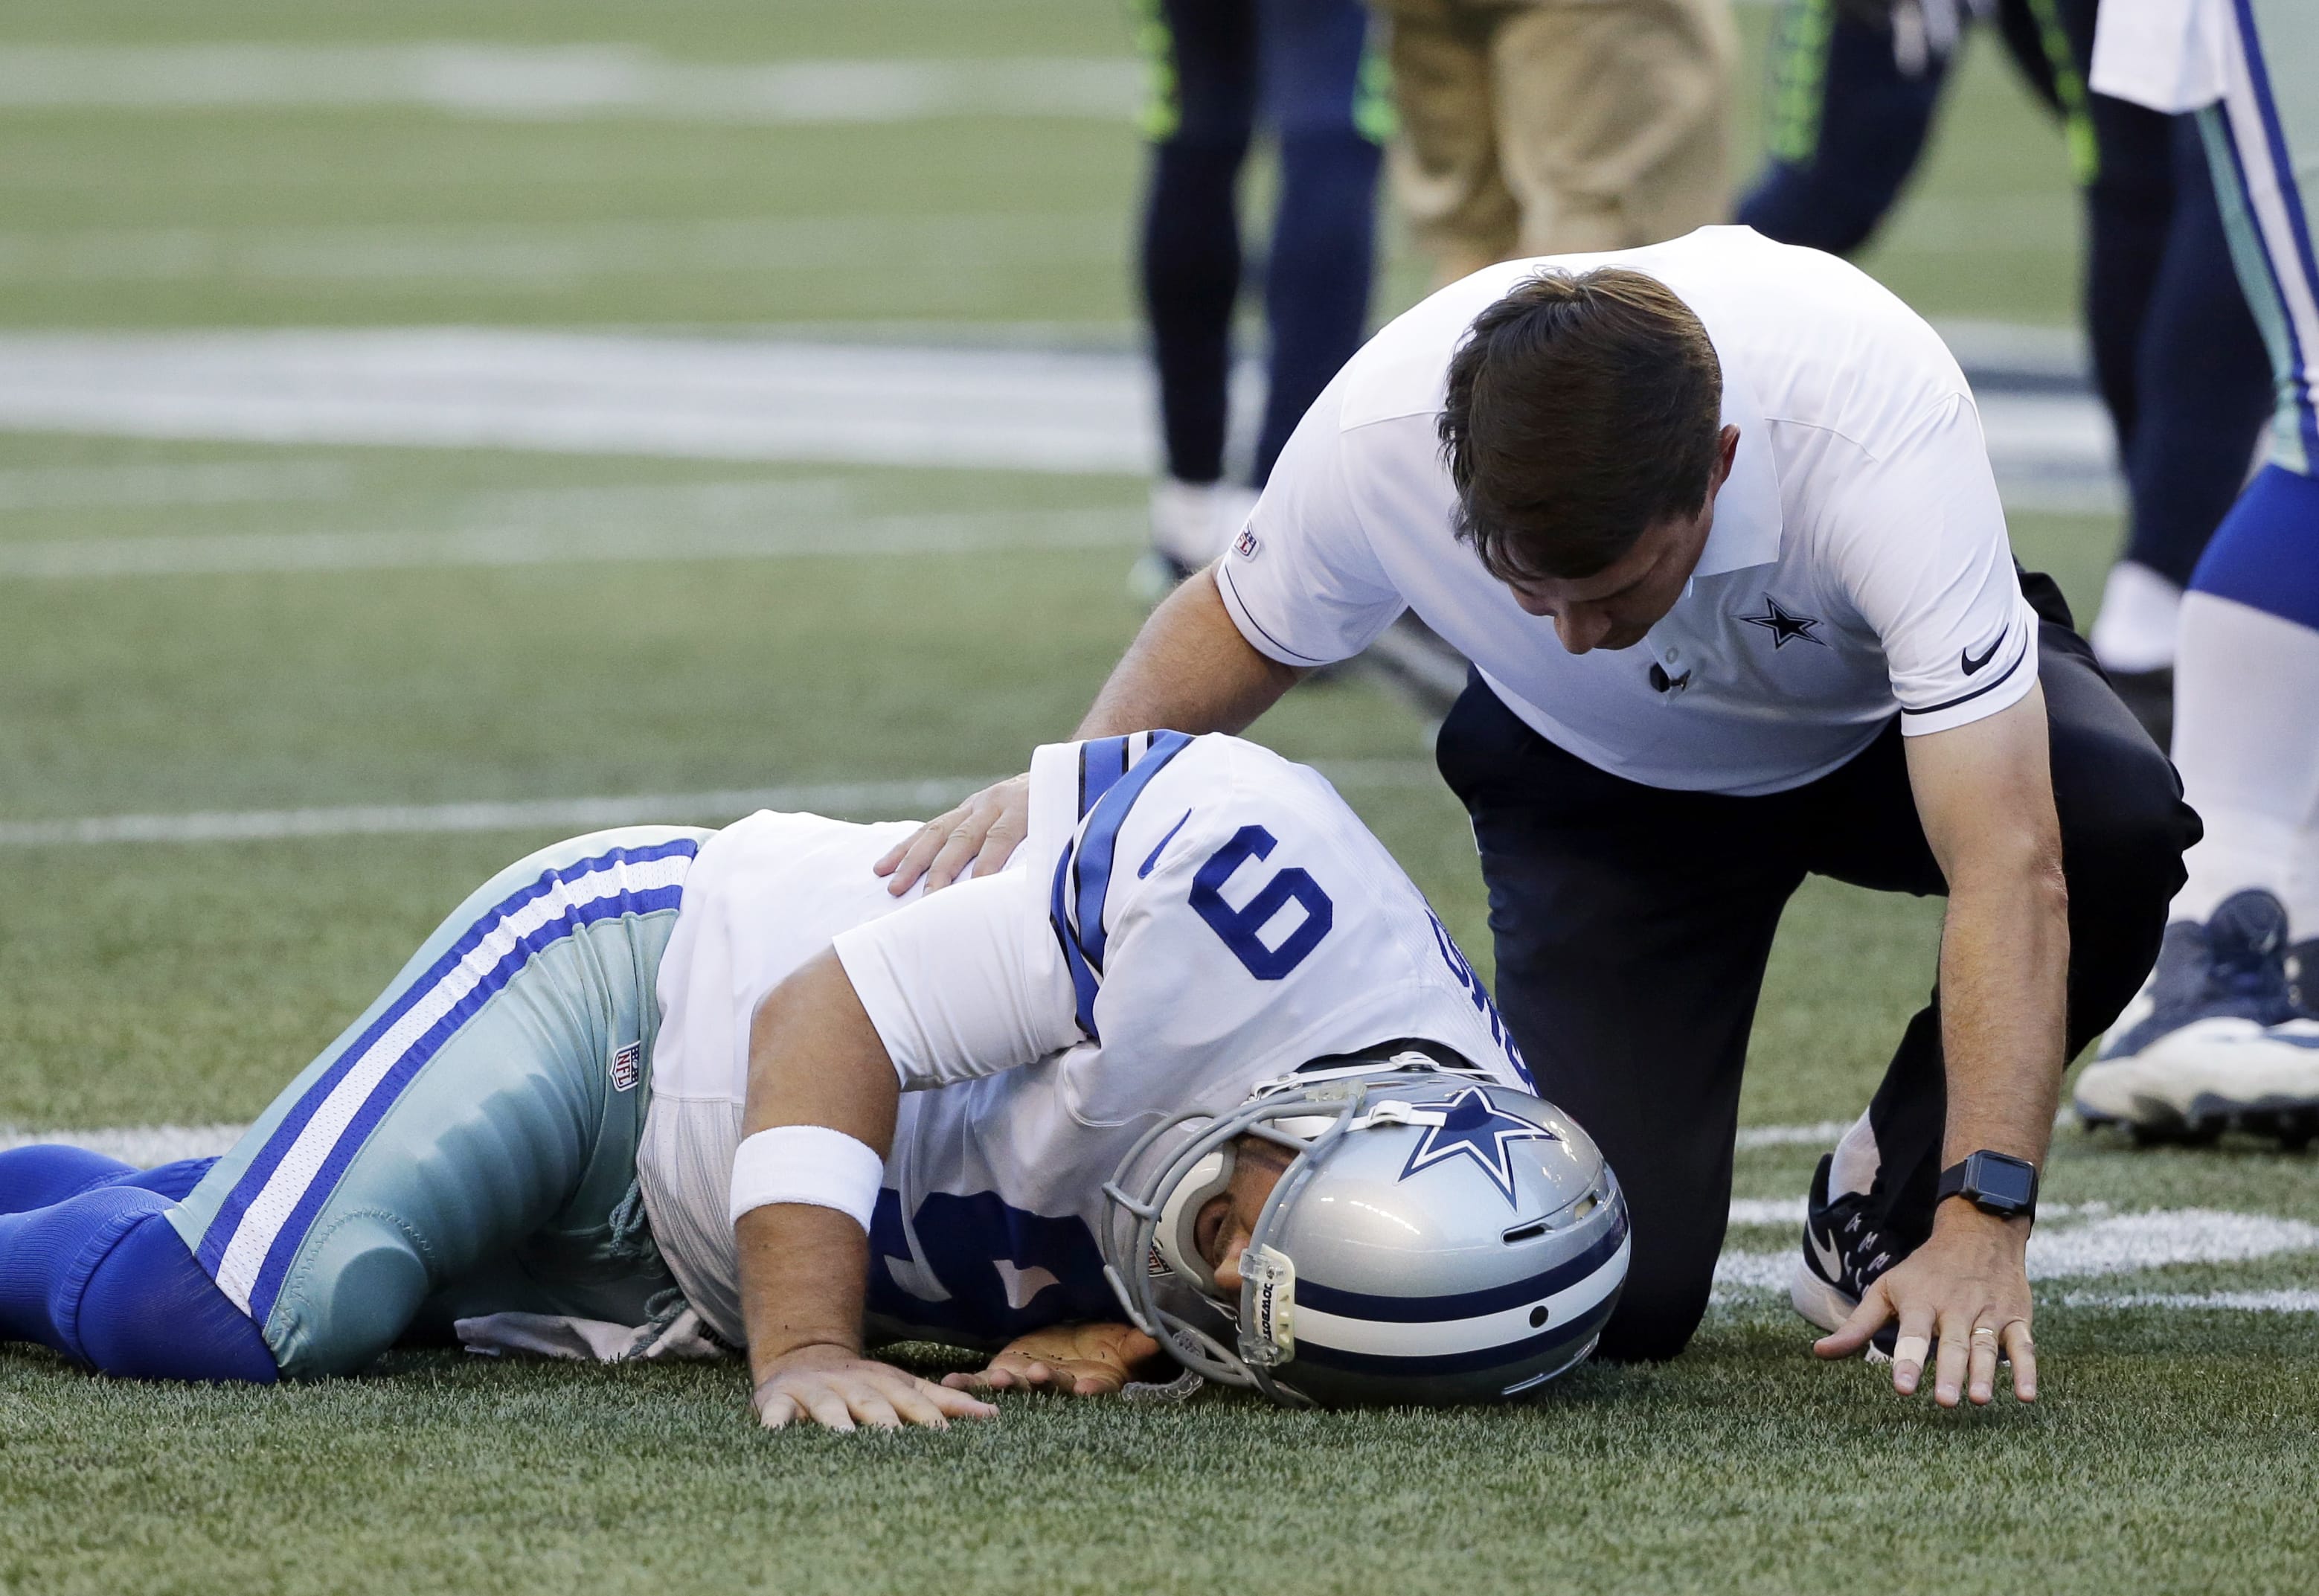 Dallas Cowboys quarterback Tony Romo is tended to by a trainer after he went down on a play against the Seattle Seahawks during the first half of a preseason NFL football game Thursday, Aug. 25, 2016, in Seattle.